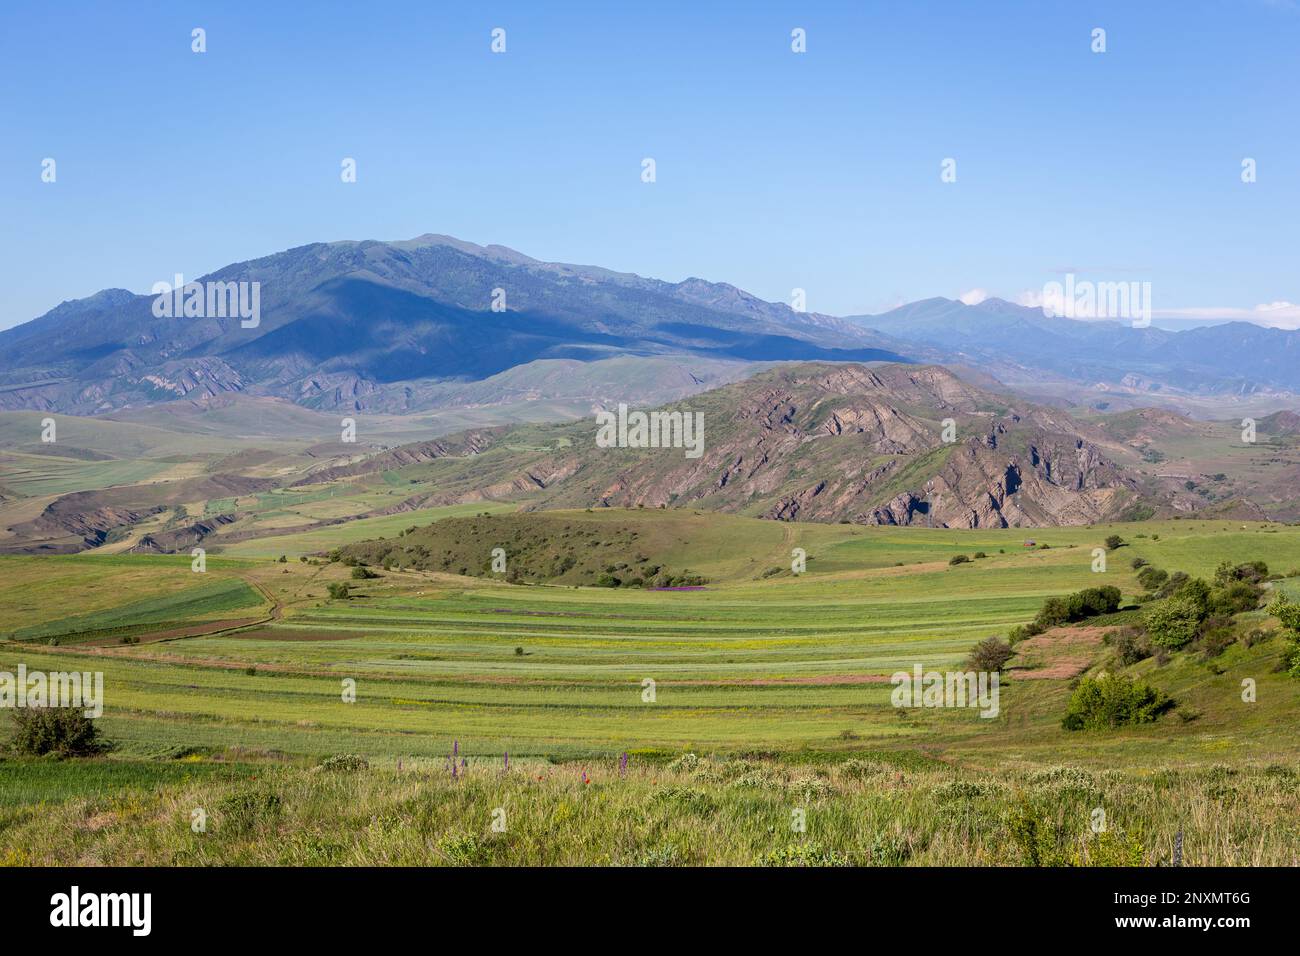 Green hills of Lesser Caucasus mountains in Samtskhe - Javakheti region in Georgia with agriculture fields and grasslands. Stock Photo